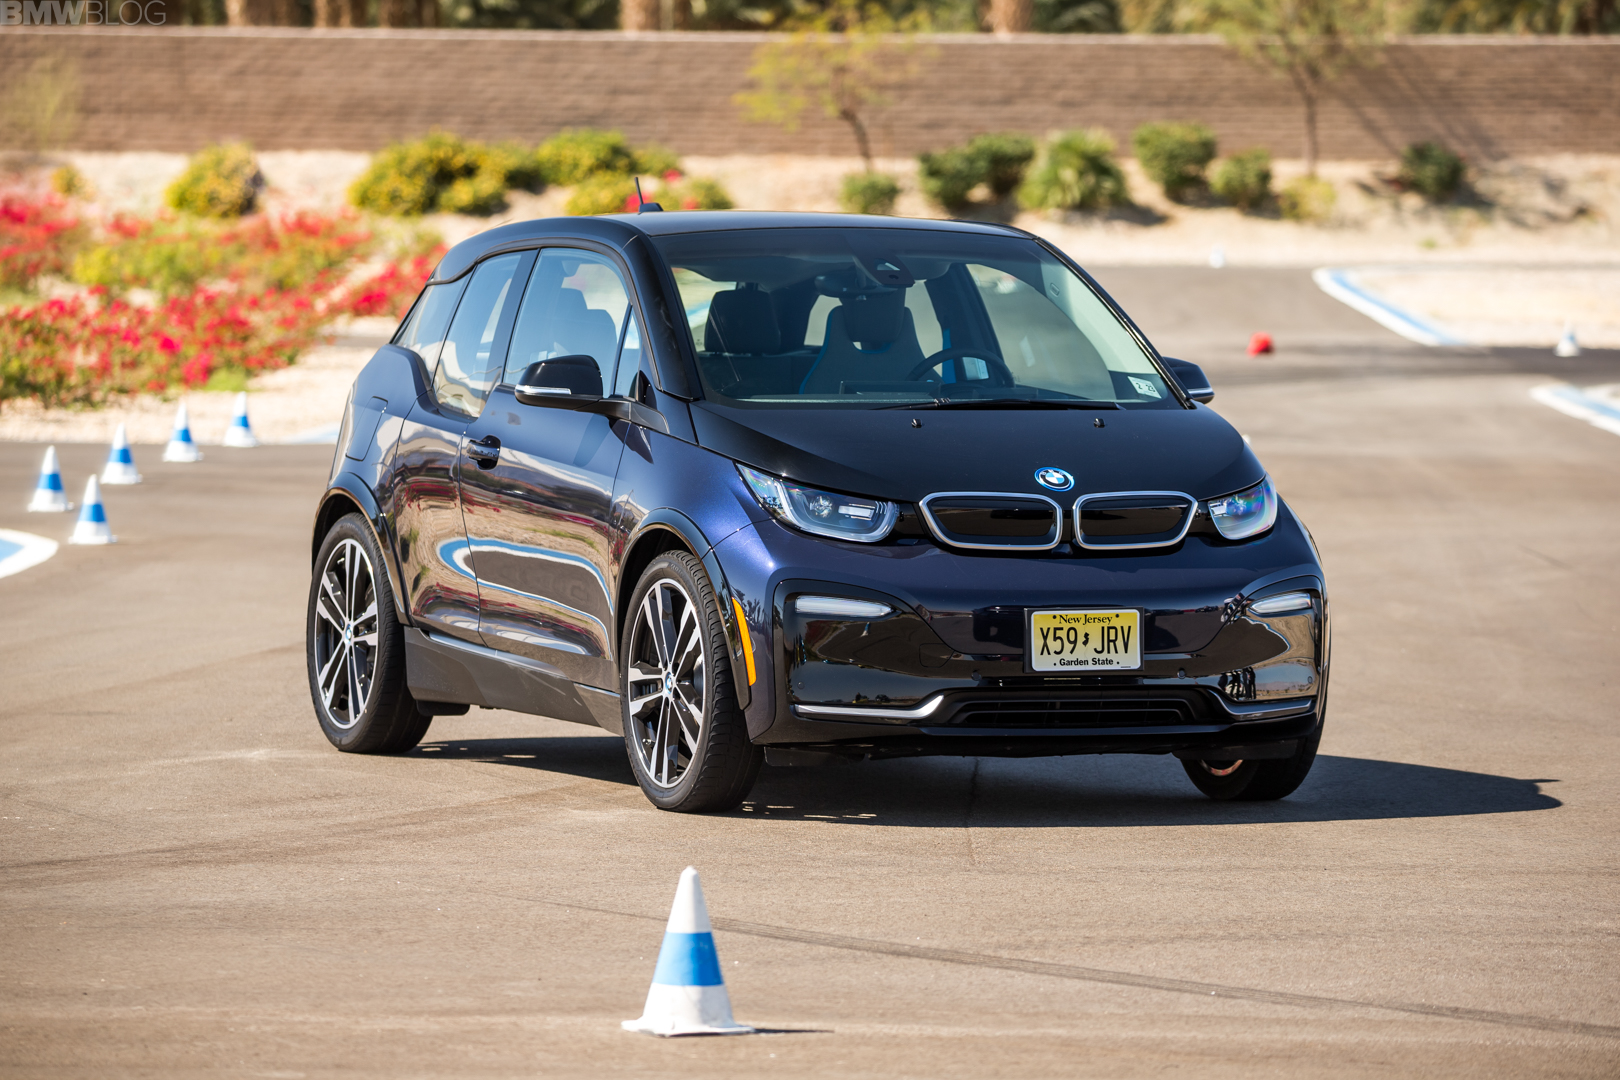 Top Gear reviews the BMW i3S in Britain